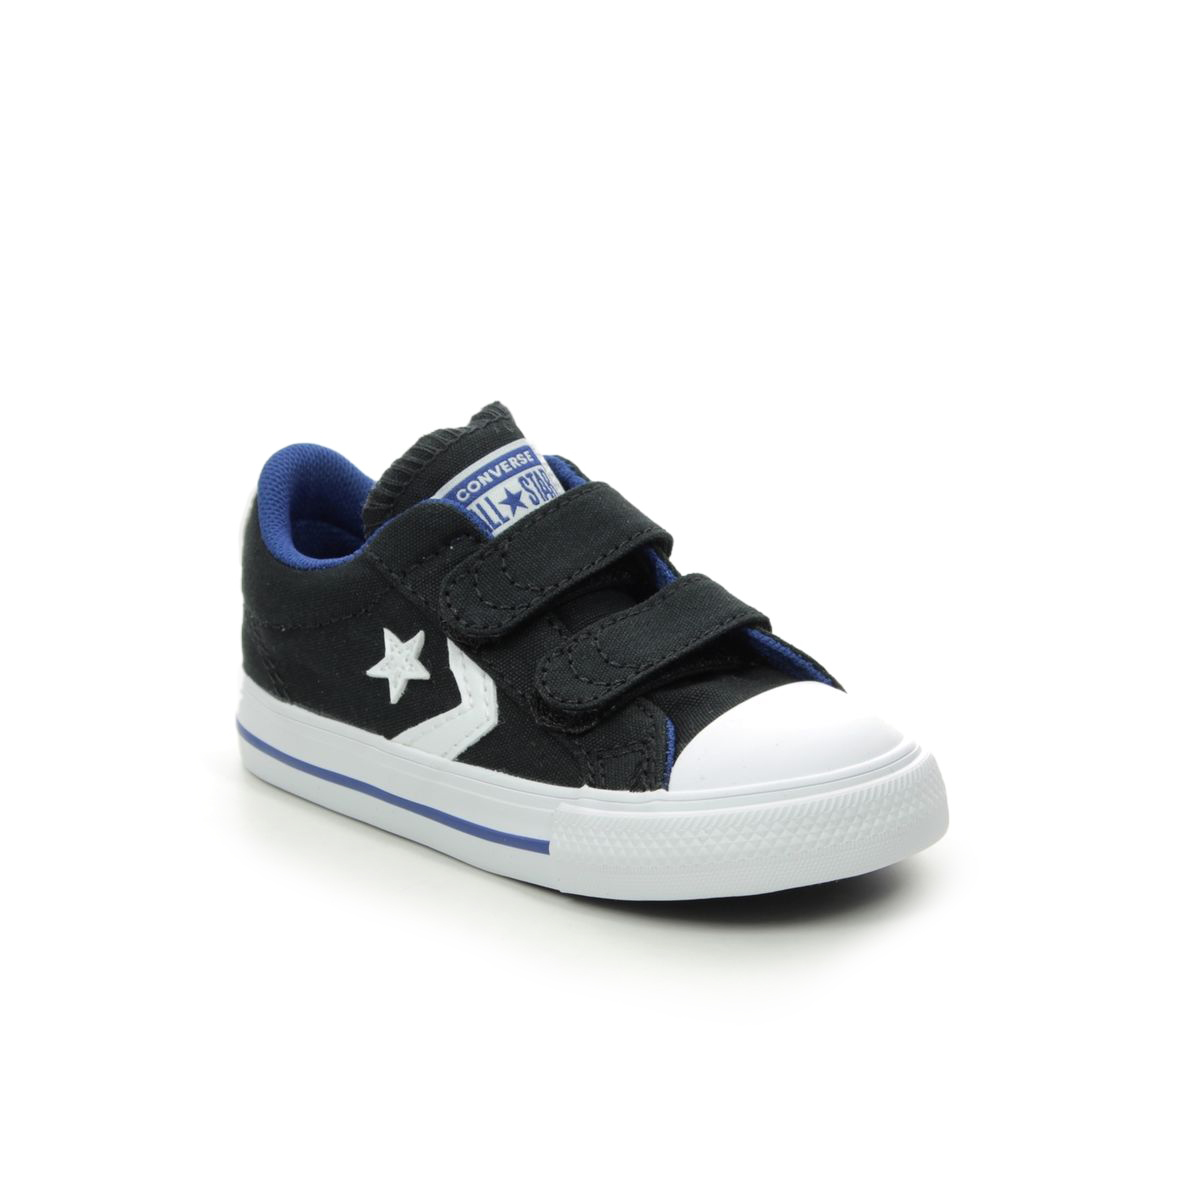 Converse Star Player 2v 766953C-011 Black - blue trainers